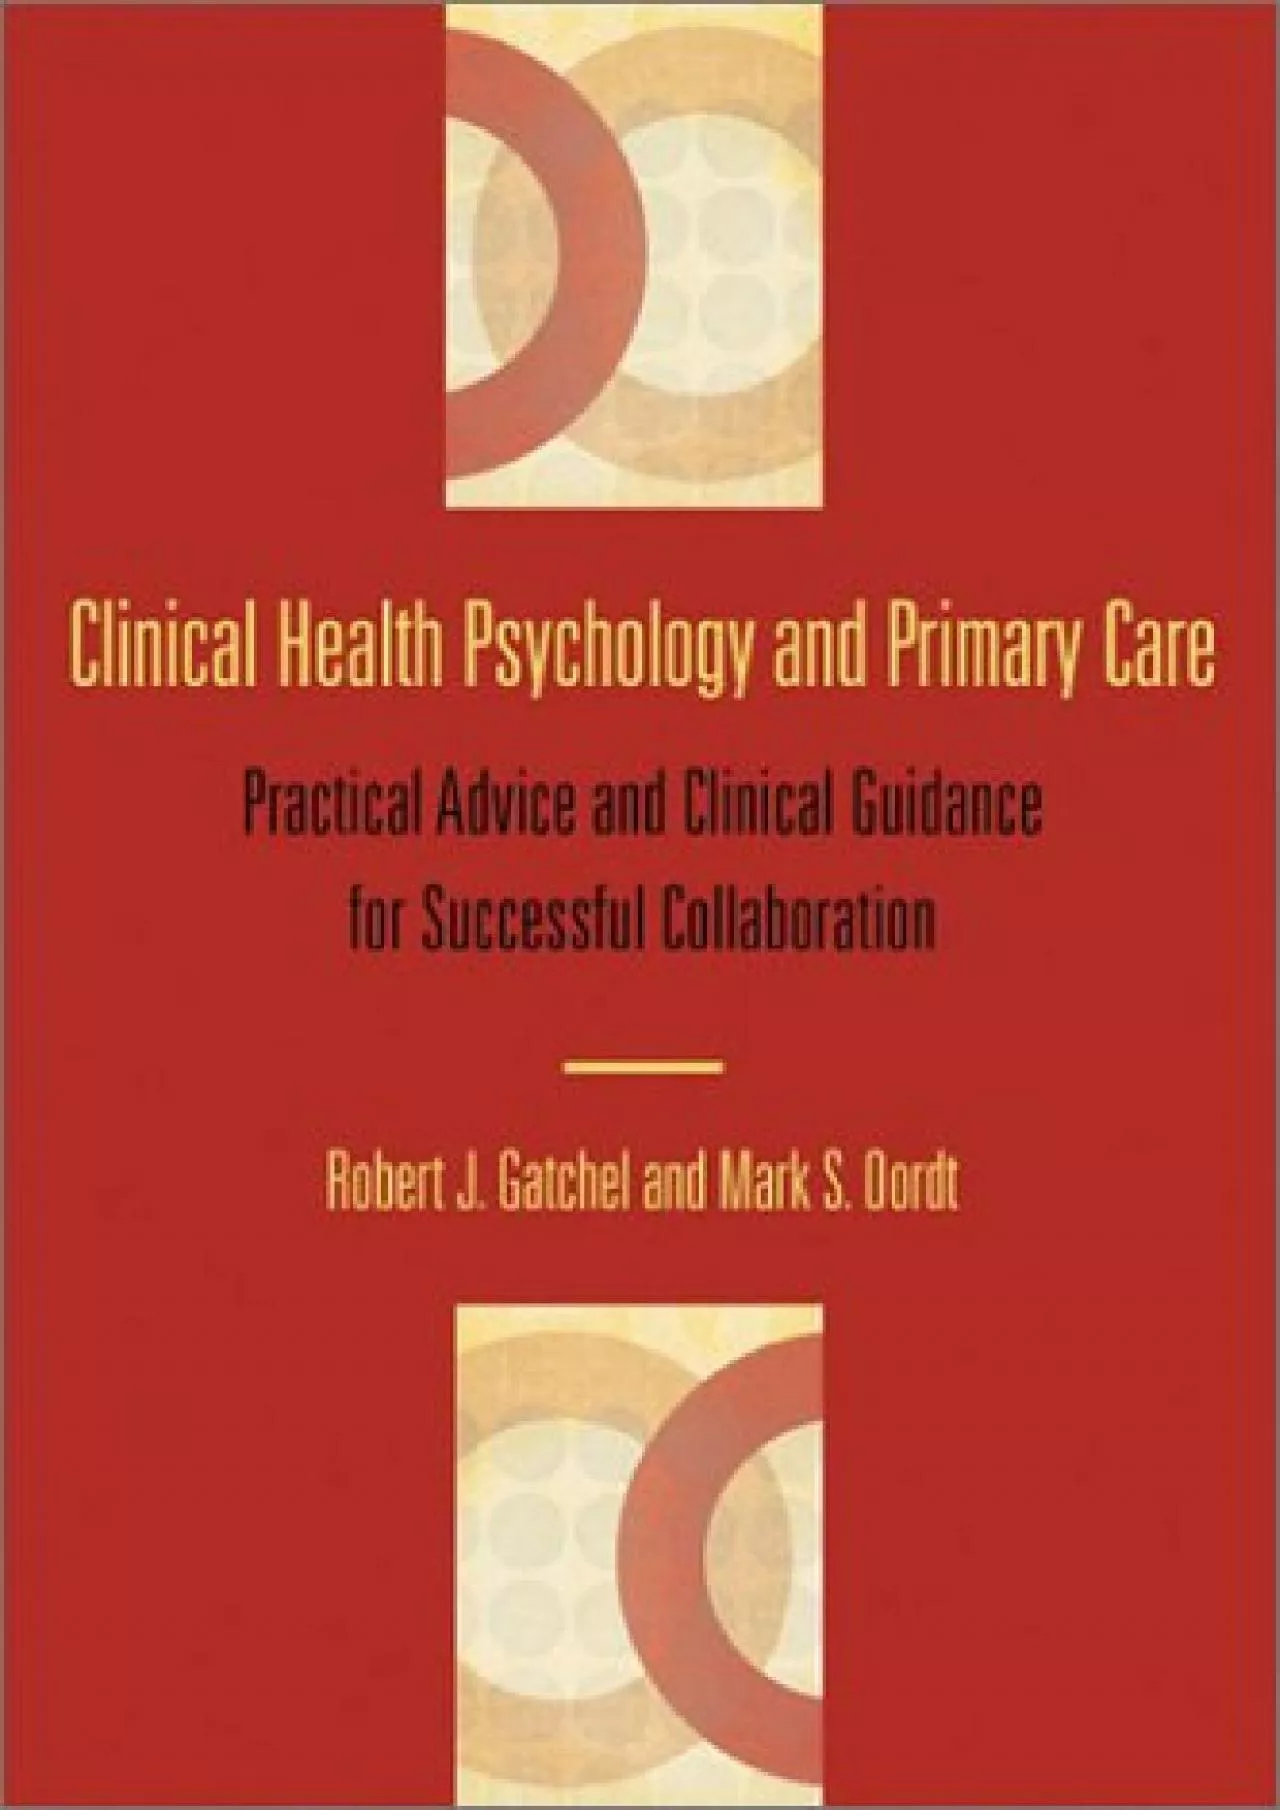 (EBOOK)-Clinical Health Psychology and Primary Care: Practical Advice and Clinical Guidance